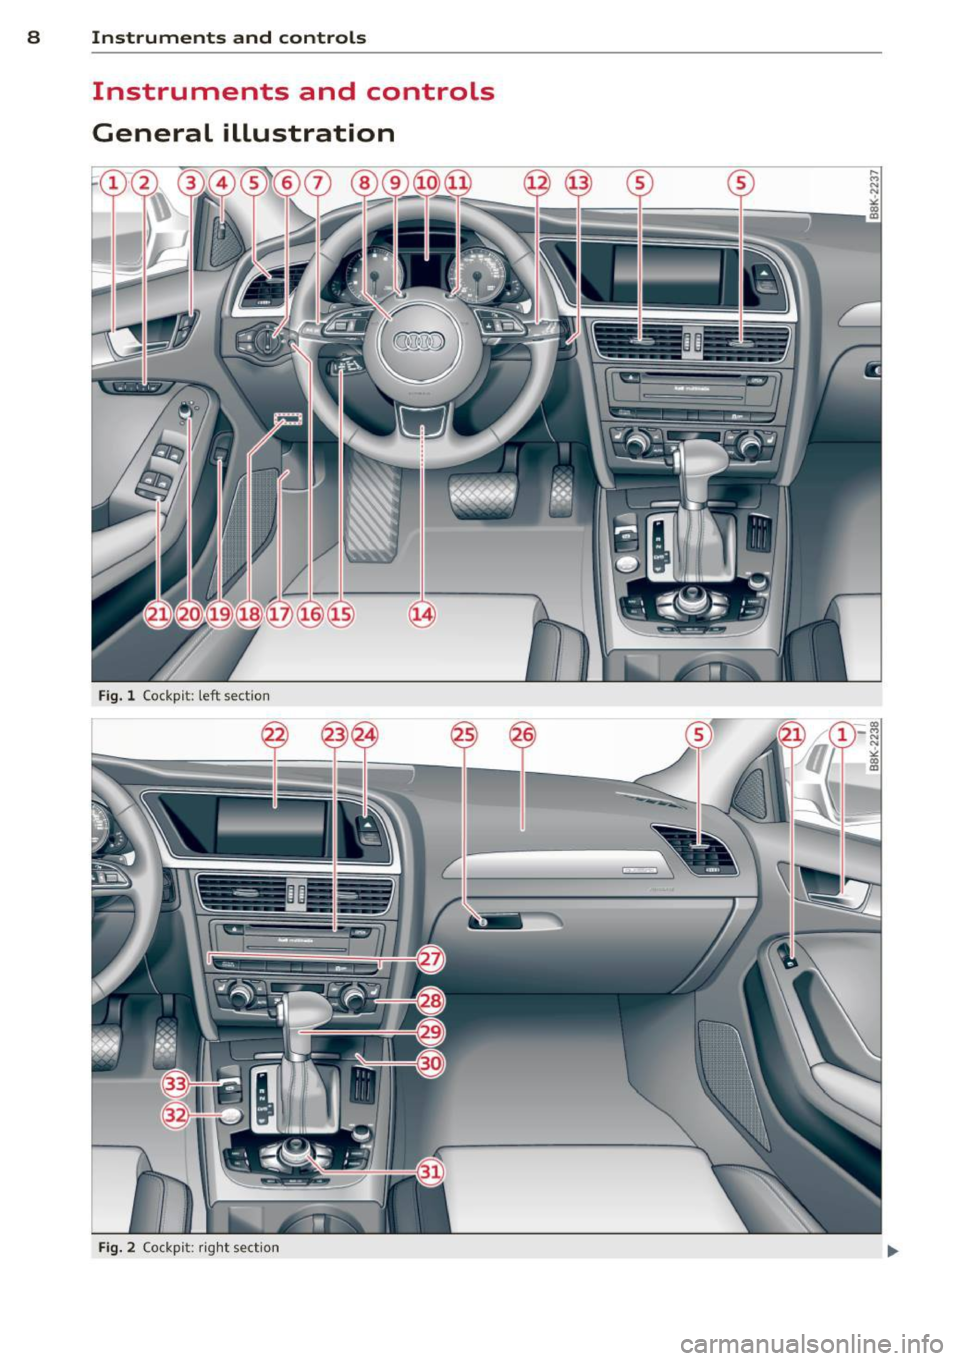 AUDI S4 2015  Owners Manual 8  Instruments and controls 
Instruments  and  controls 
General  illustration 
Fig. l Cockp it:  left  sect io n 
---=- ---1 =----- -
- --
- --
Fig. 2 Cock pi t: ri ght  sect io n  